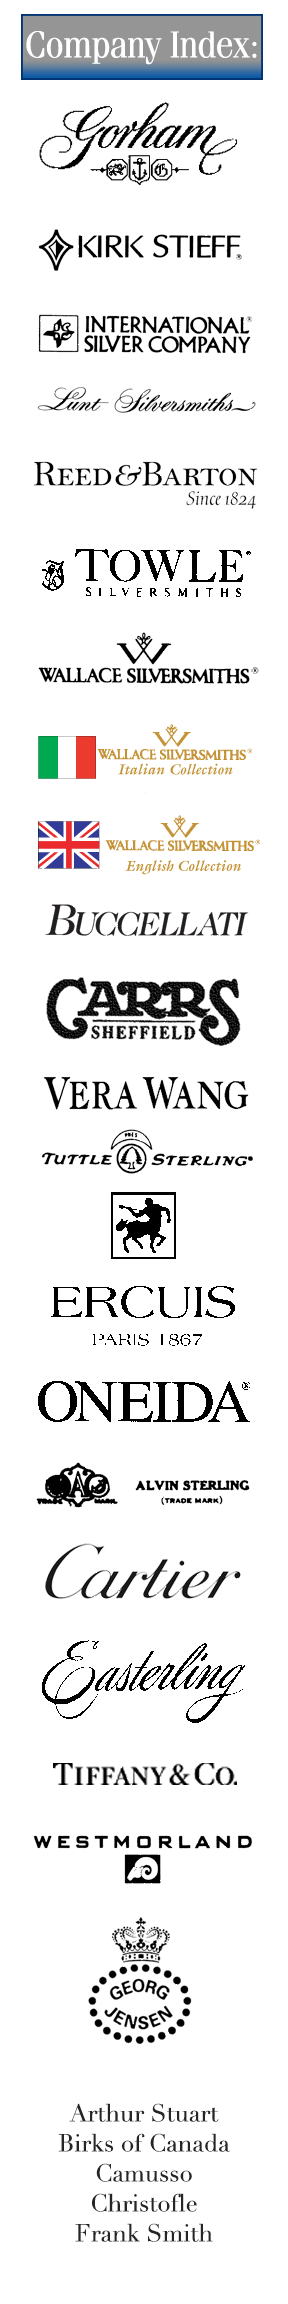 sterling companies